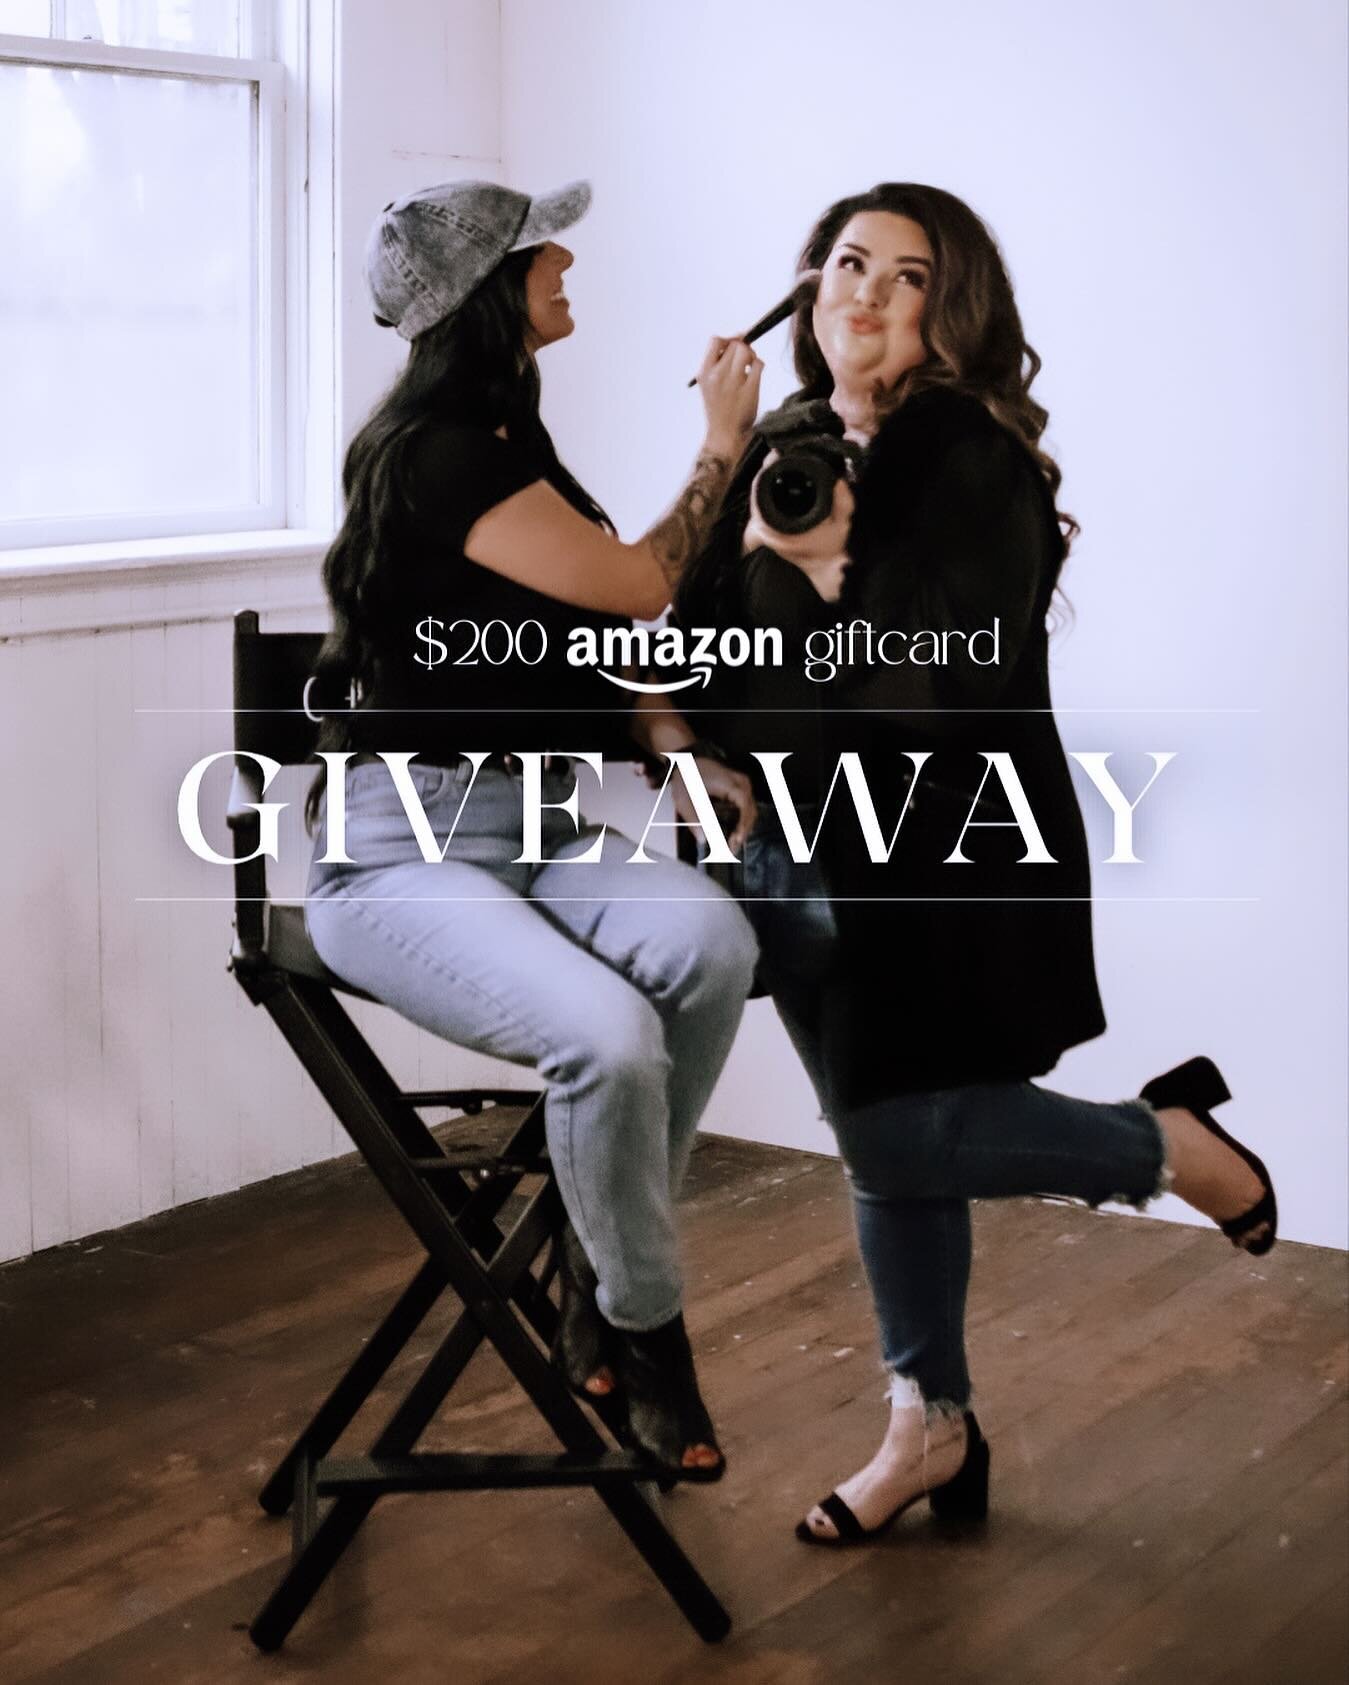 ✨GIVEAWAY✨
⁣
@alyssagaigaproductions and I have partnered up to gift one lucky winner the chance to win a $200CDN Amazon giftcard 🫶🏼

𝐇𝐎𝐖 𝐓𝐎 𝐄𝐍𝐓𝐄𝐑:

☁️ follow⁣ @chloelorraine.mua + Alyssagaigaproductions
☁️ like + save this post⁣
☁️ tag y